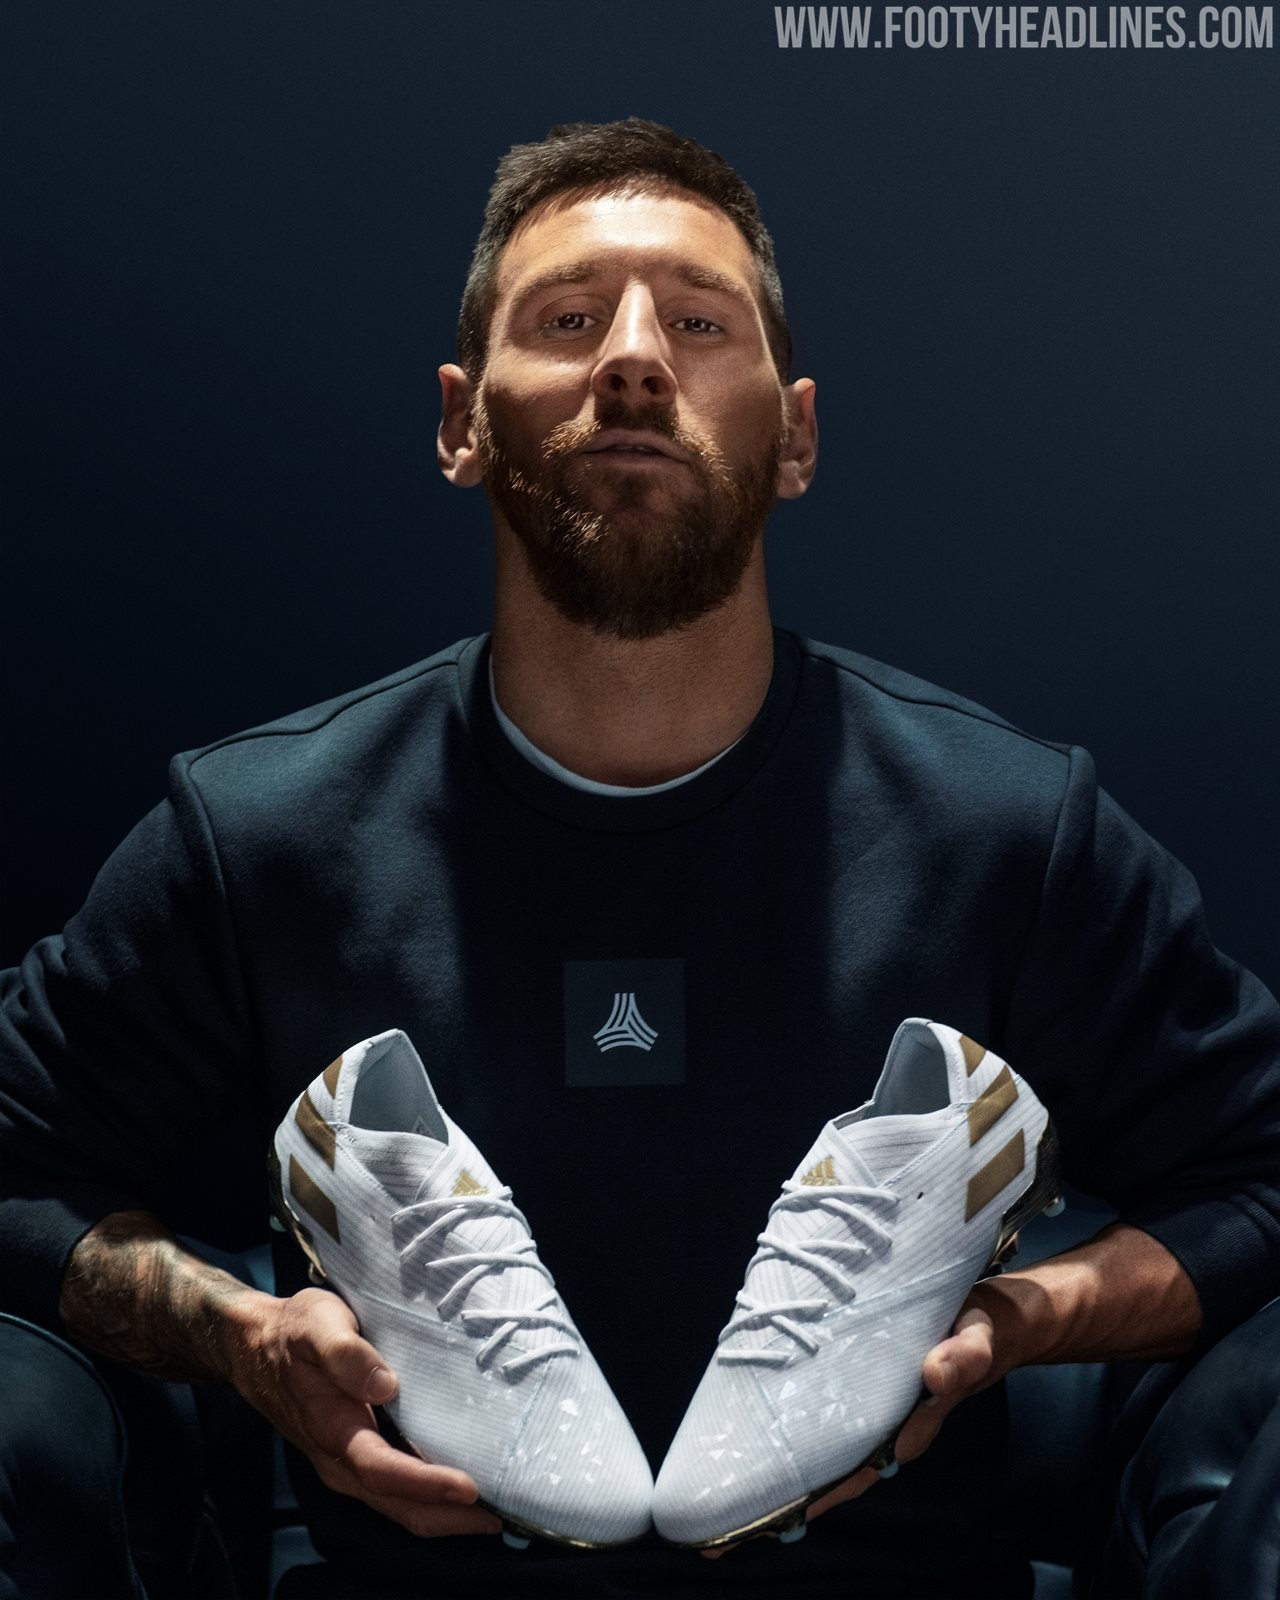 Limited-Edition Adidas Nemeziz Messi "15 Years" Boots | 15th Anniversary of Pro Debut - Footy Headlines